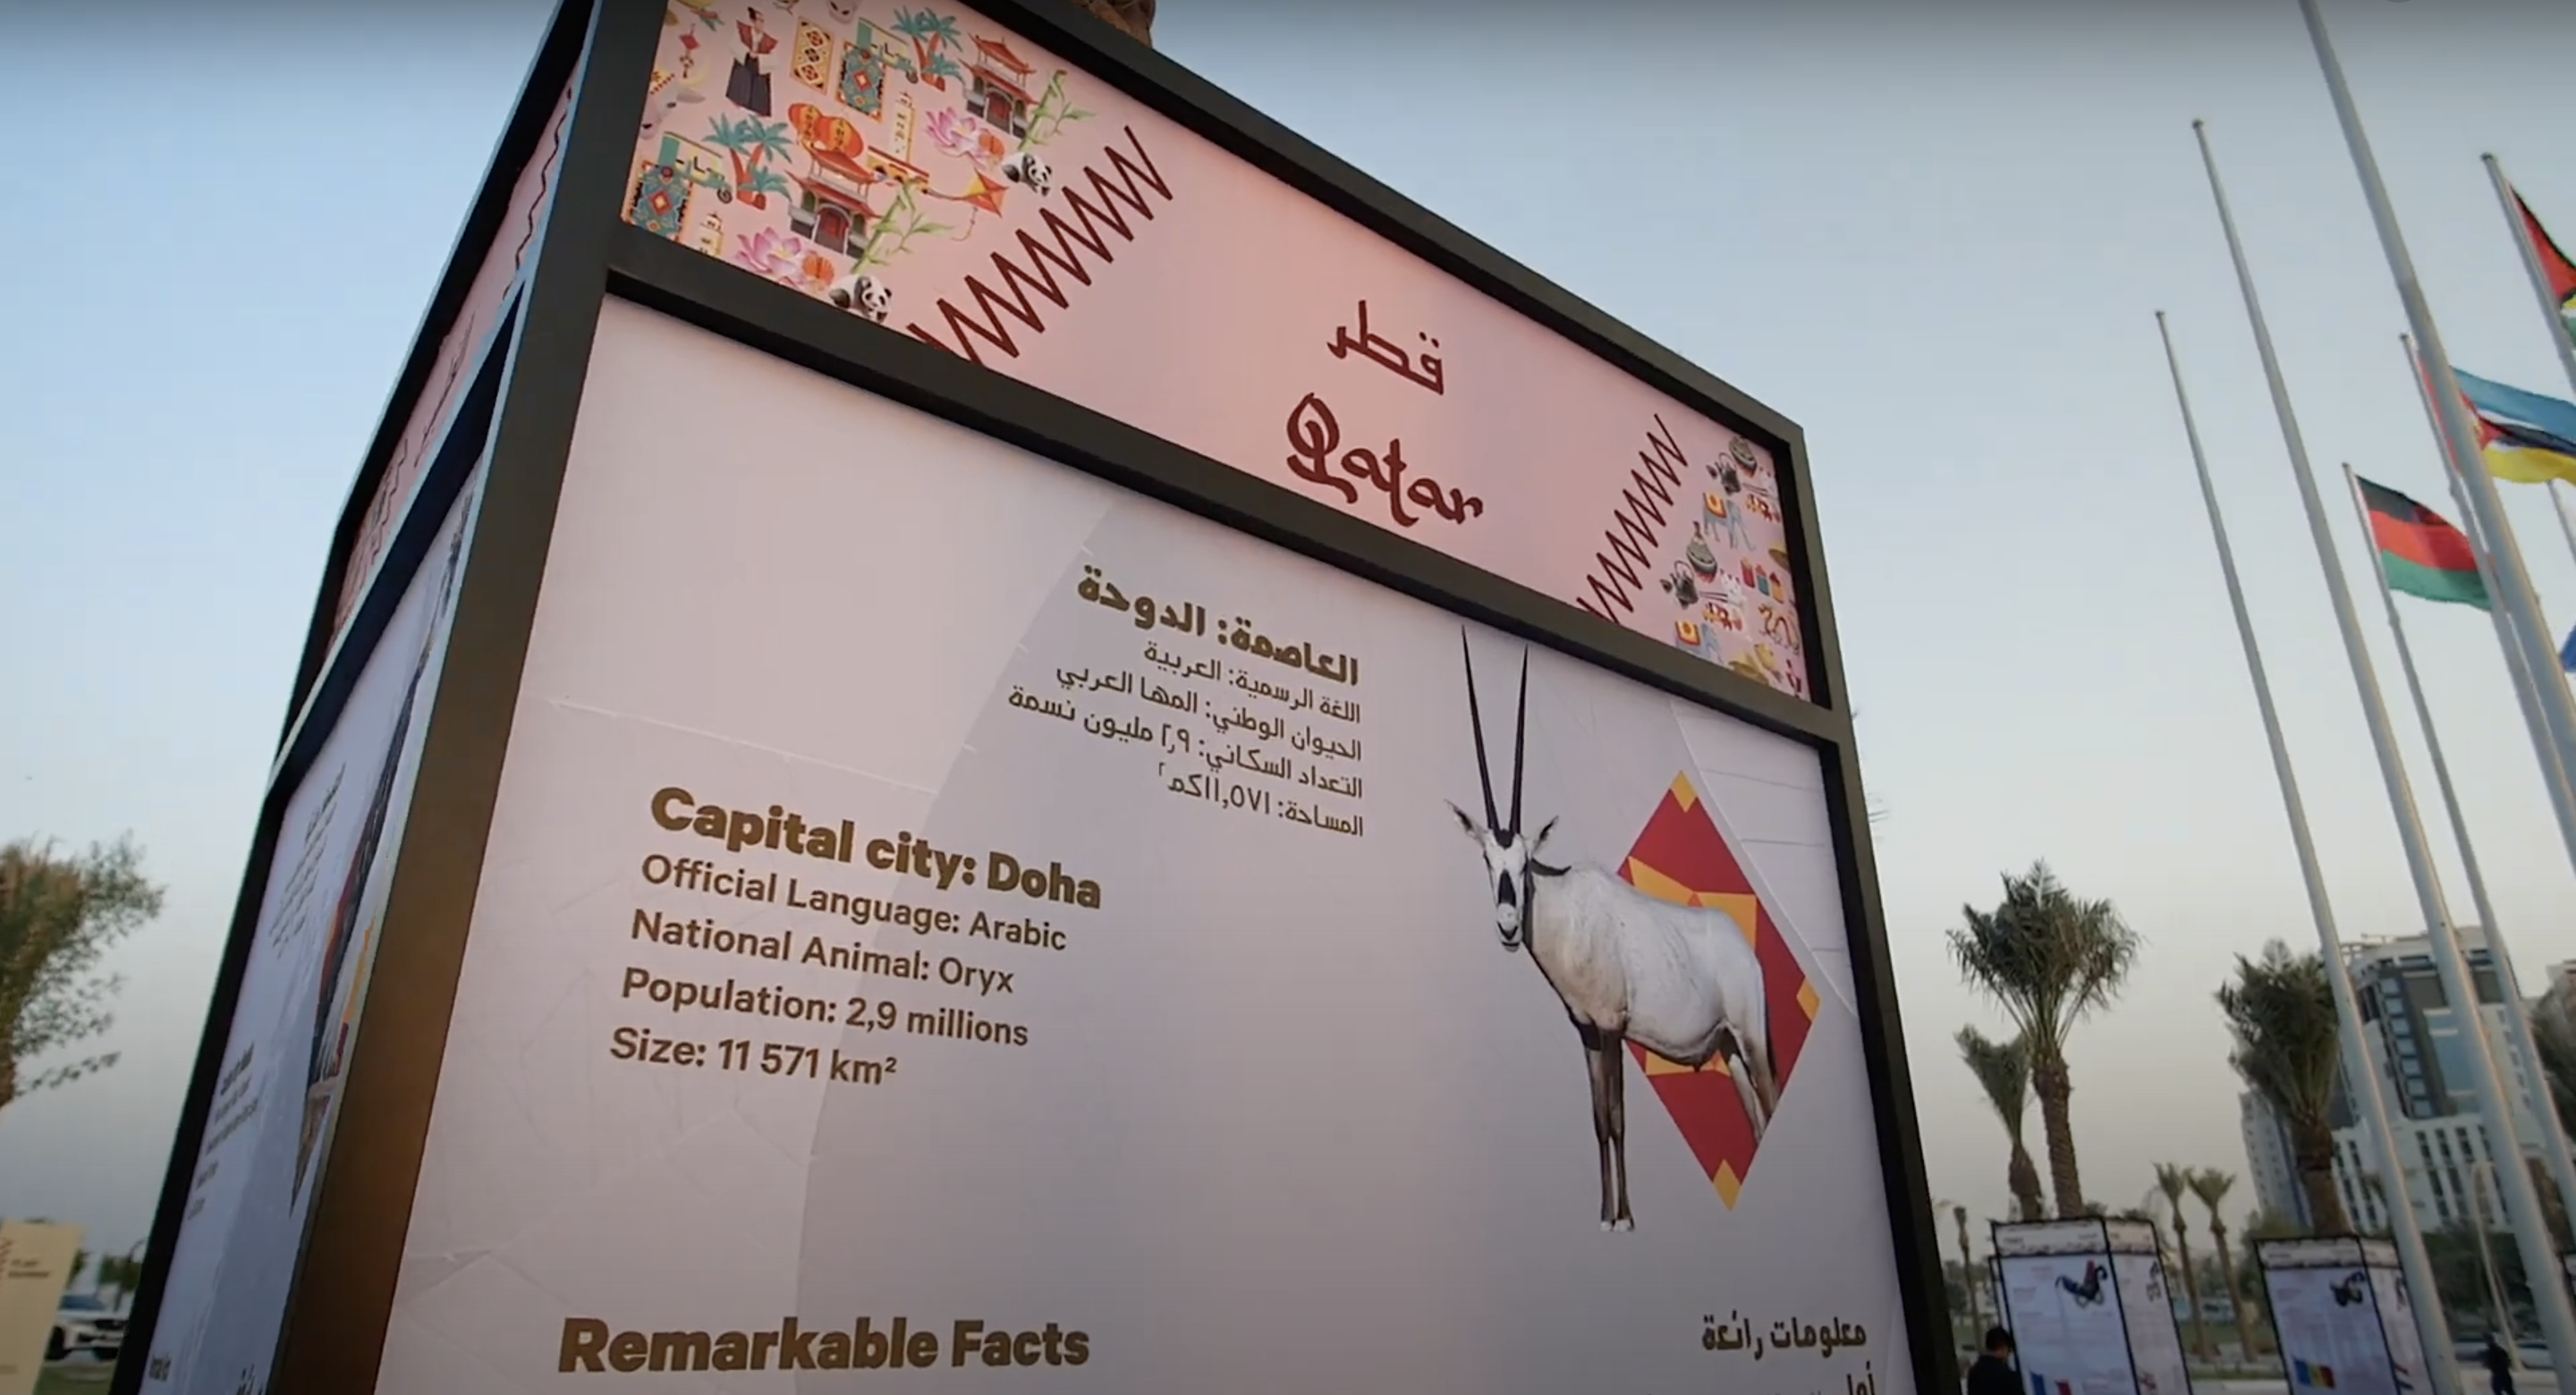 An information panel at Flag Plaza in Doha, depicting statistics and facts about Qatar in English and Arabic.